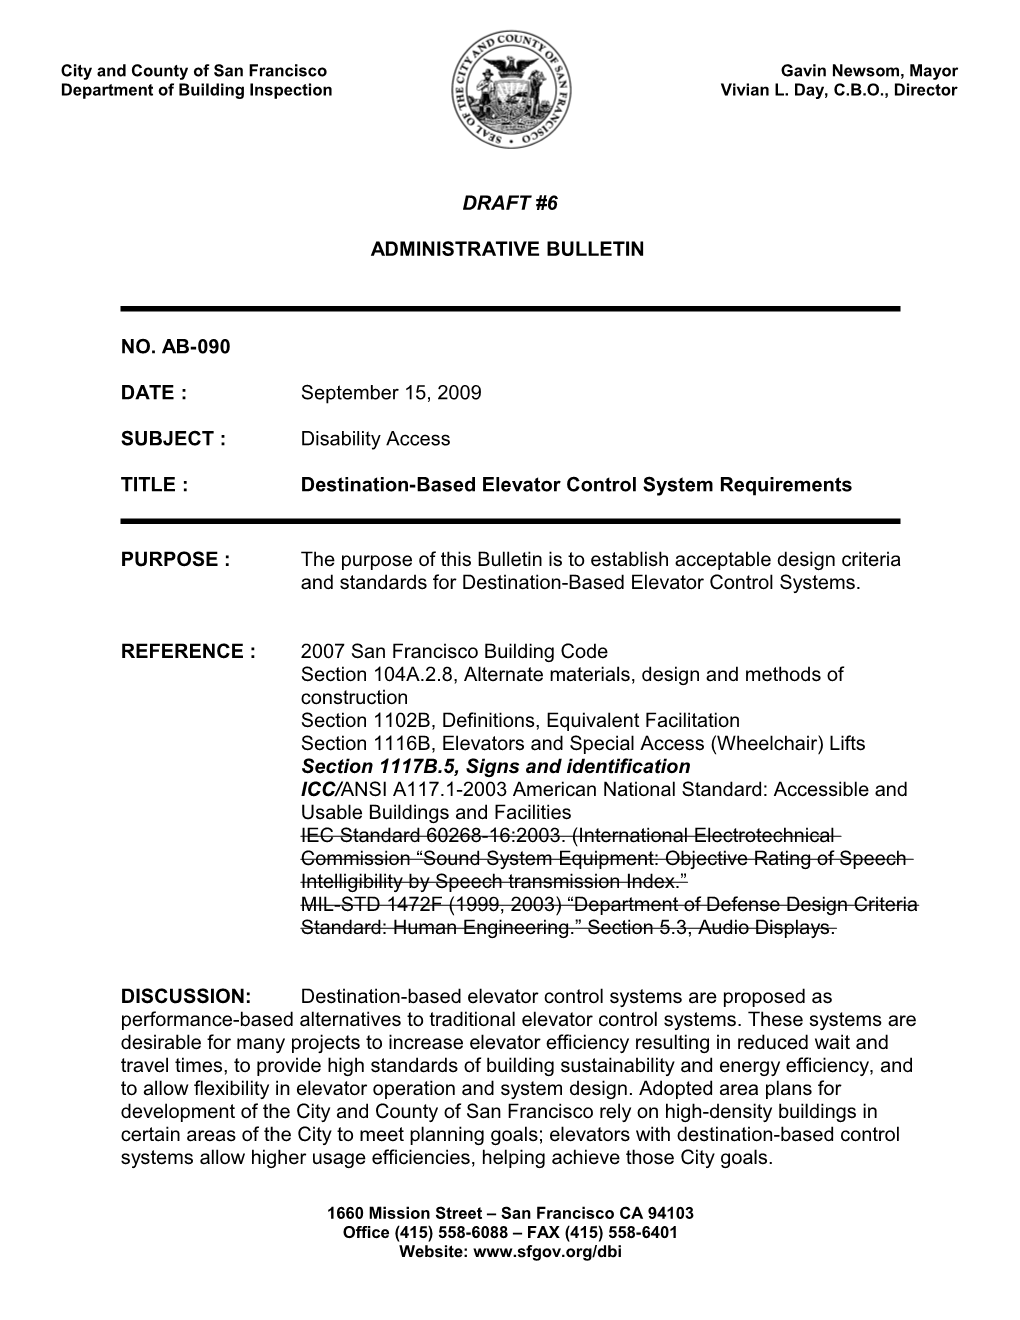 TITLE:Destination-Based Elevator Control System Requirements